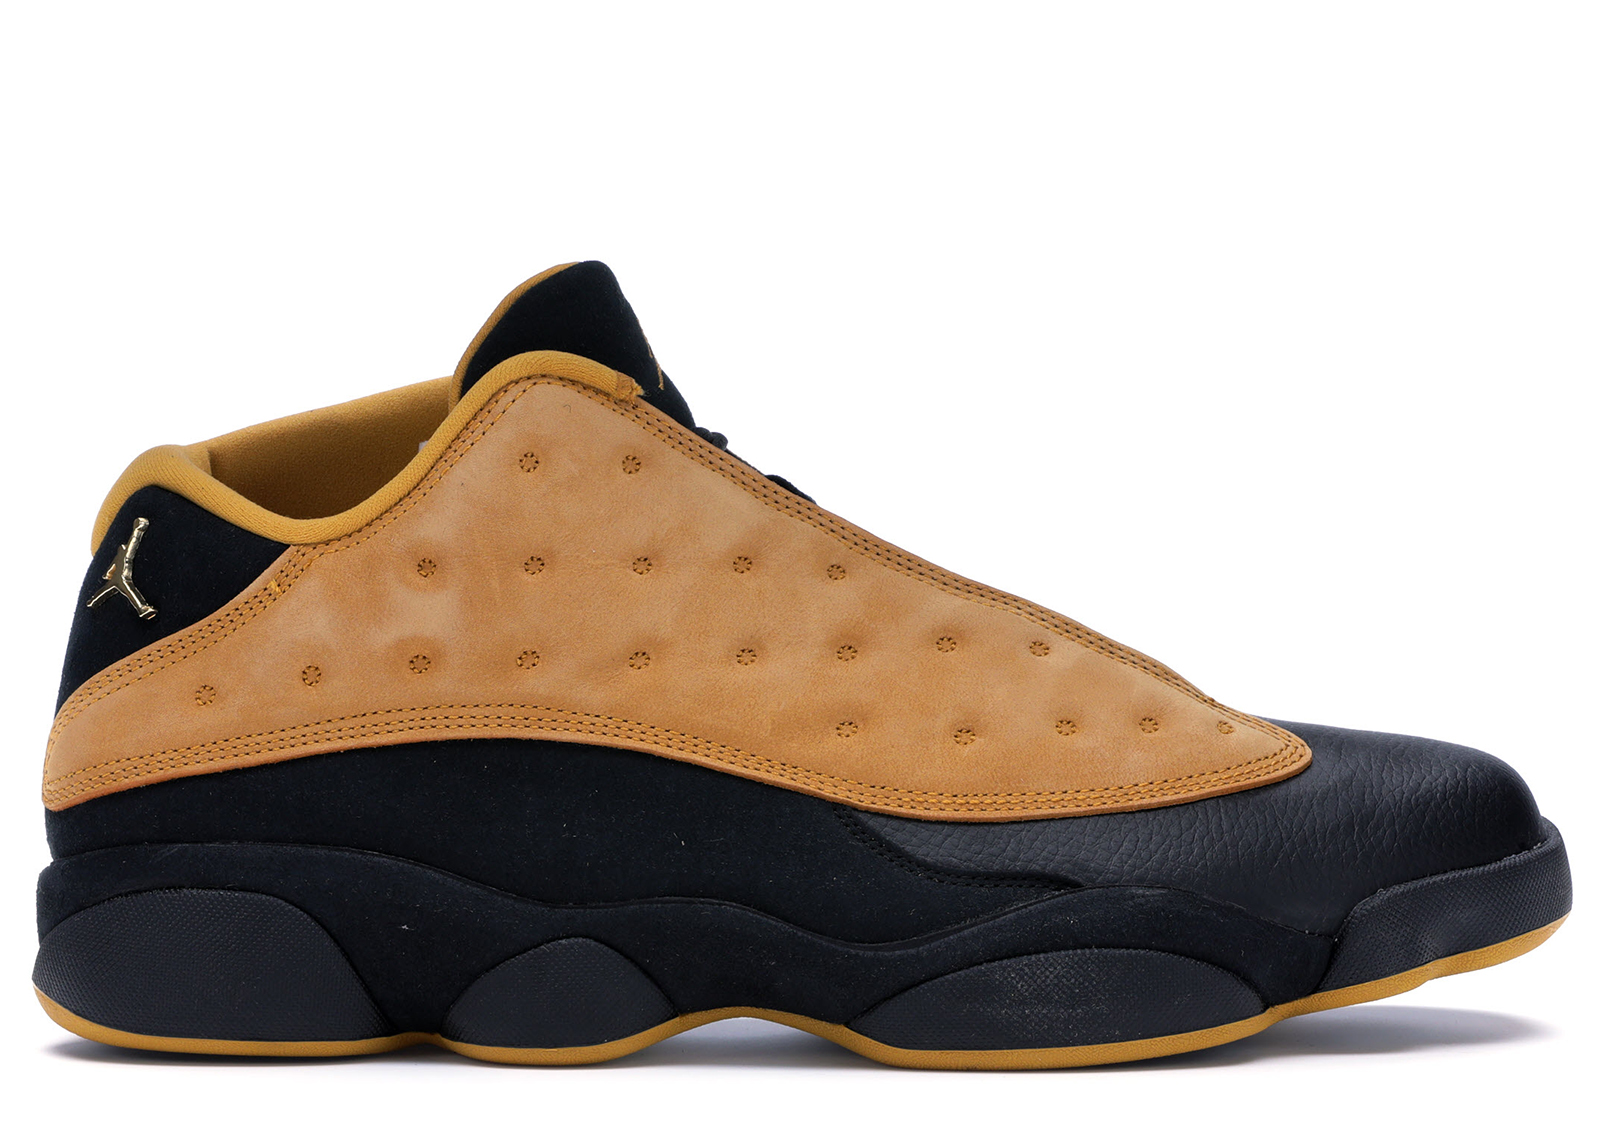 black and tan 13s